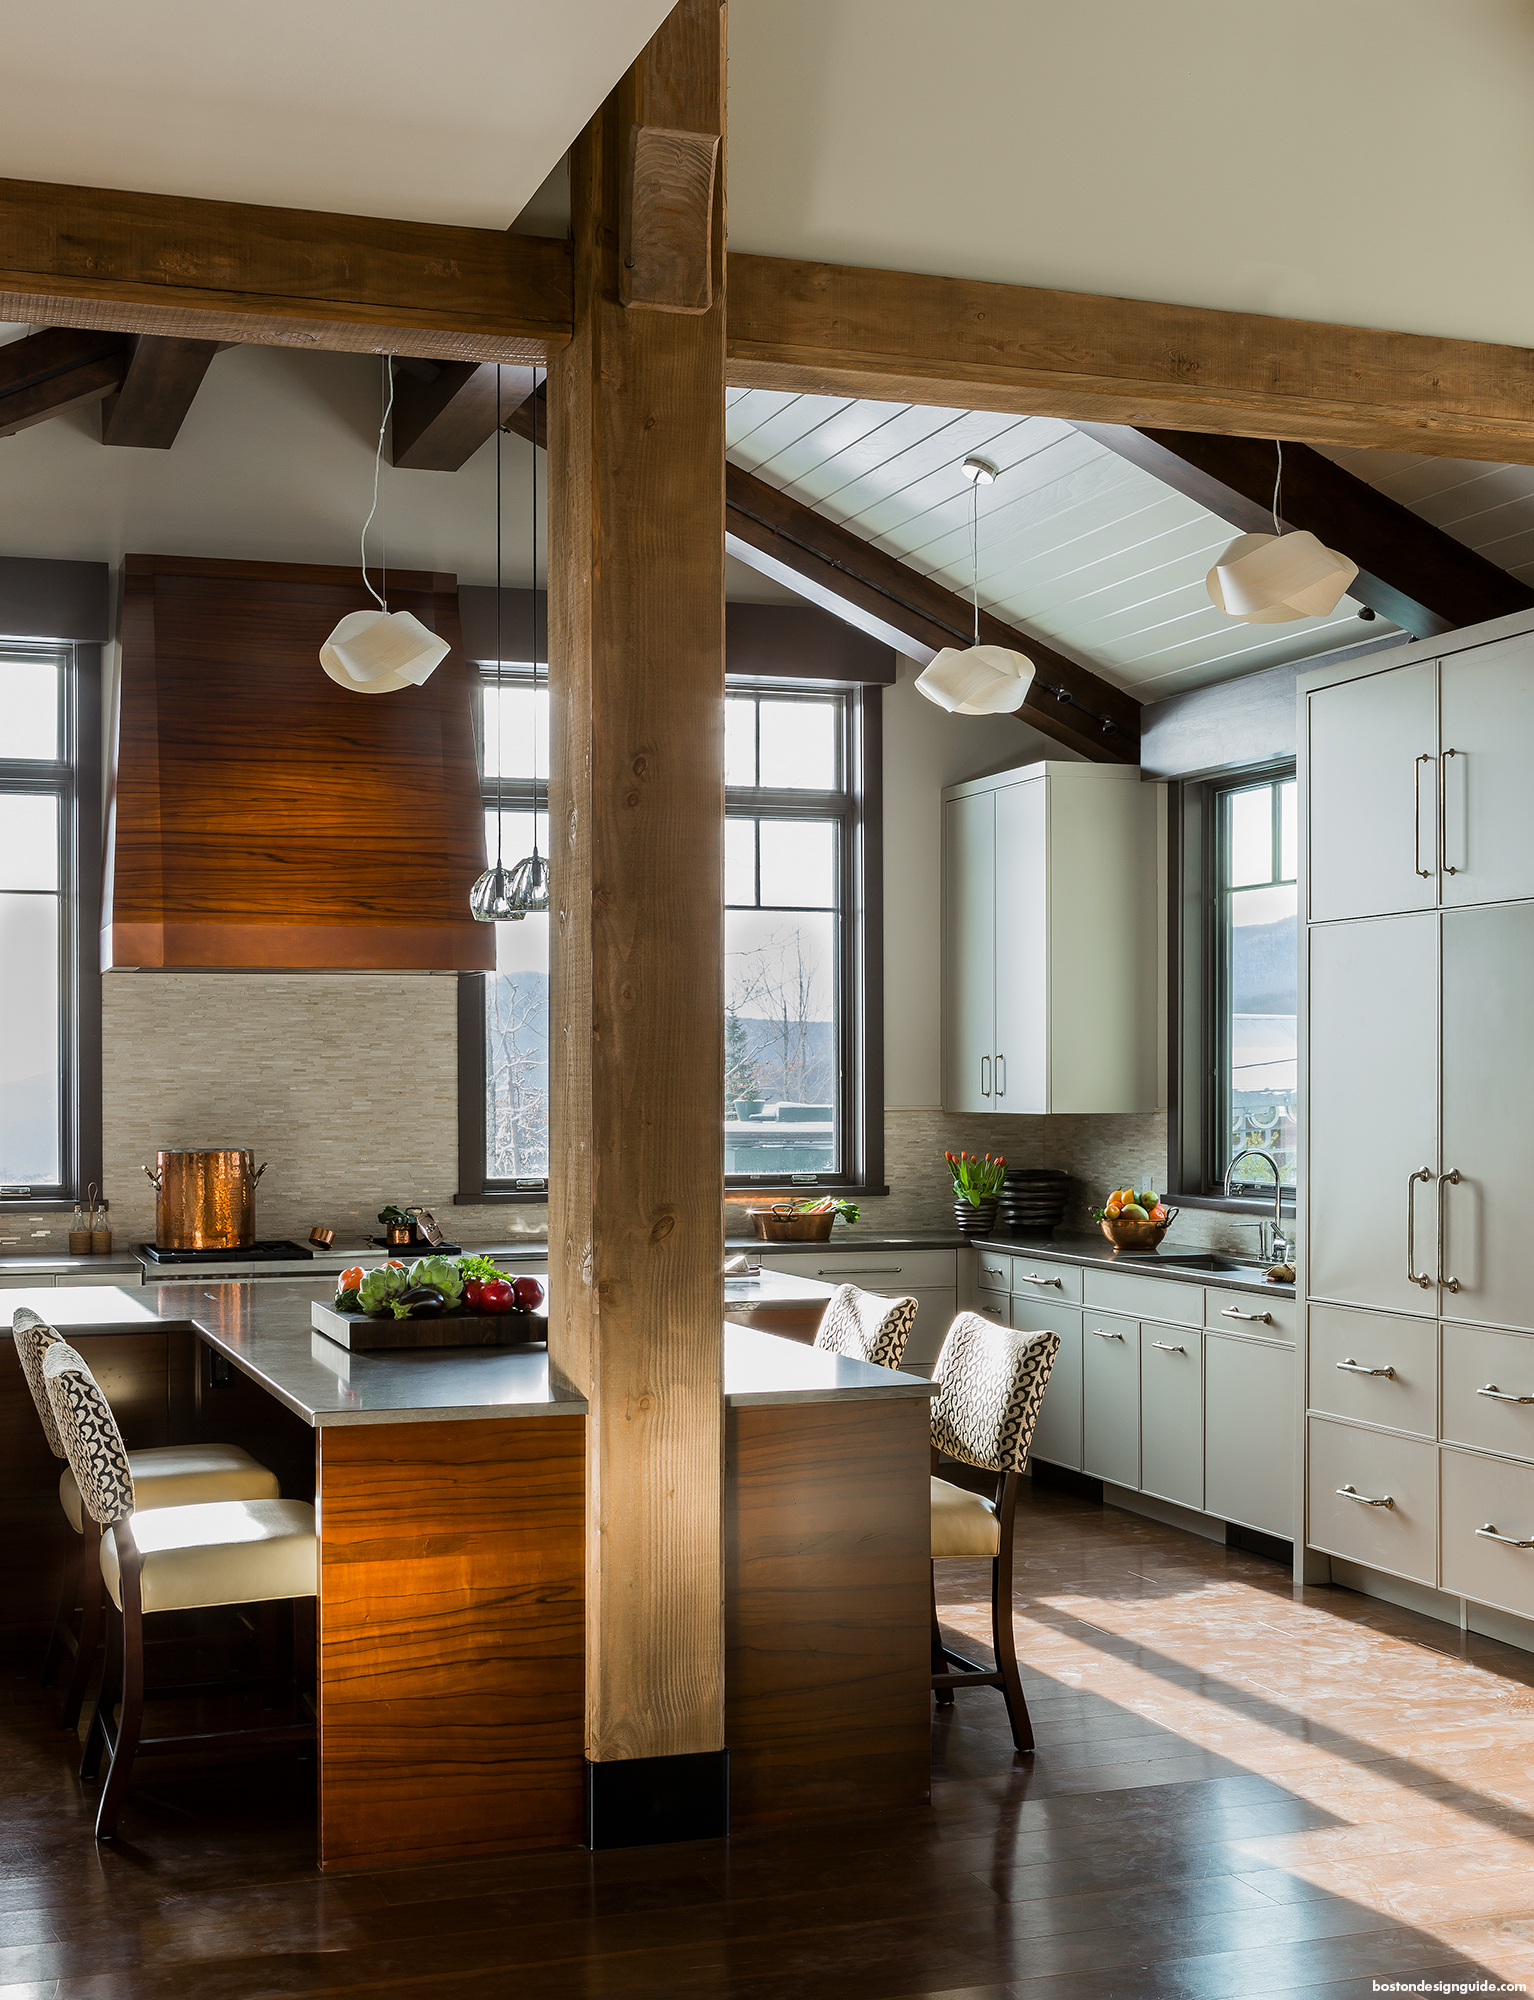 Of Our Favorite Rustic Kitchens With Exposed Wood Beams Boston